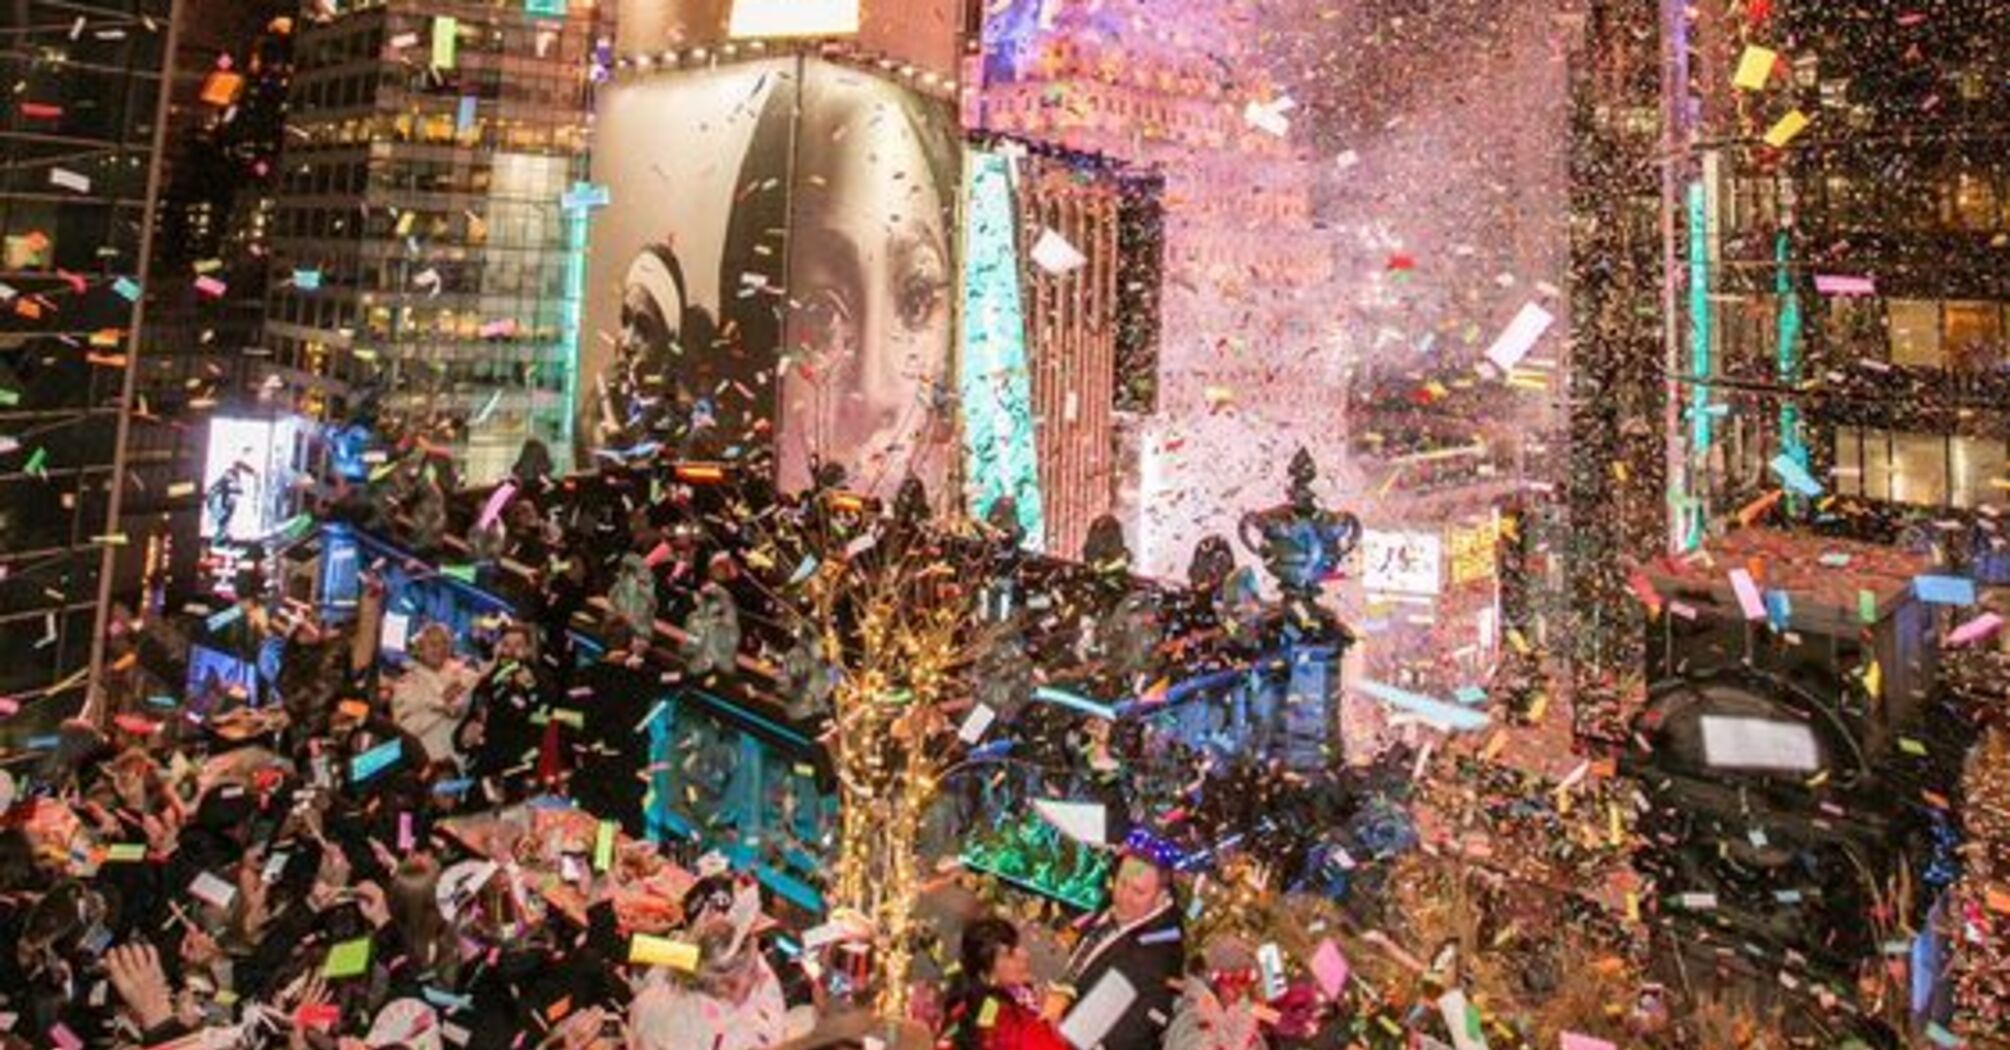 How New Year's Eve was celebrated in New York